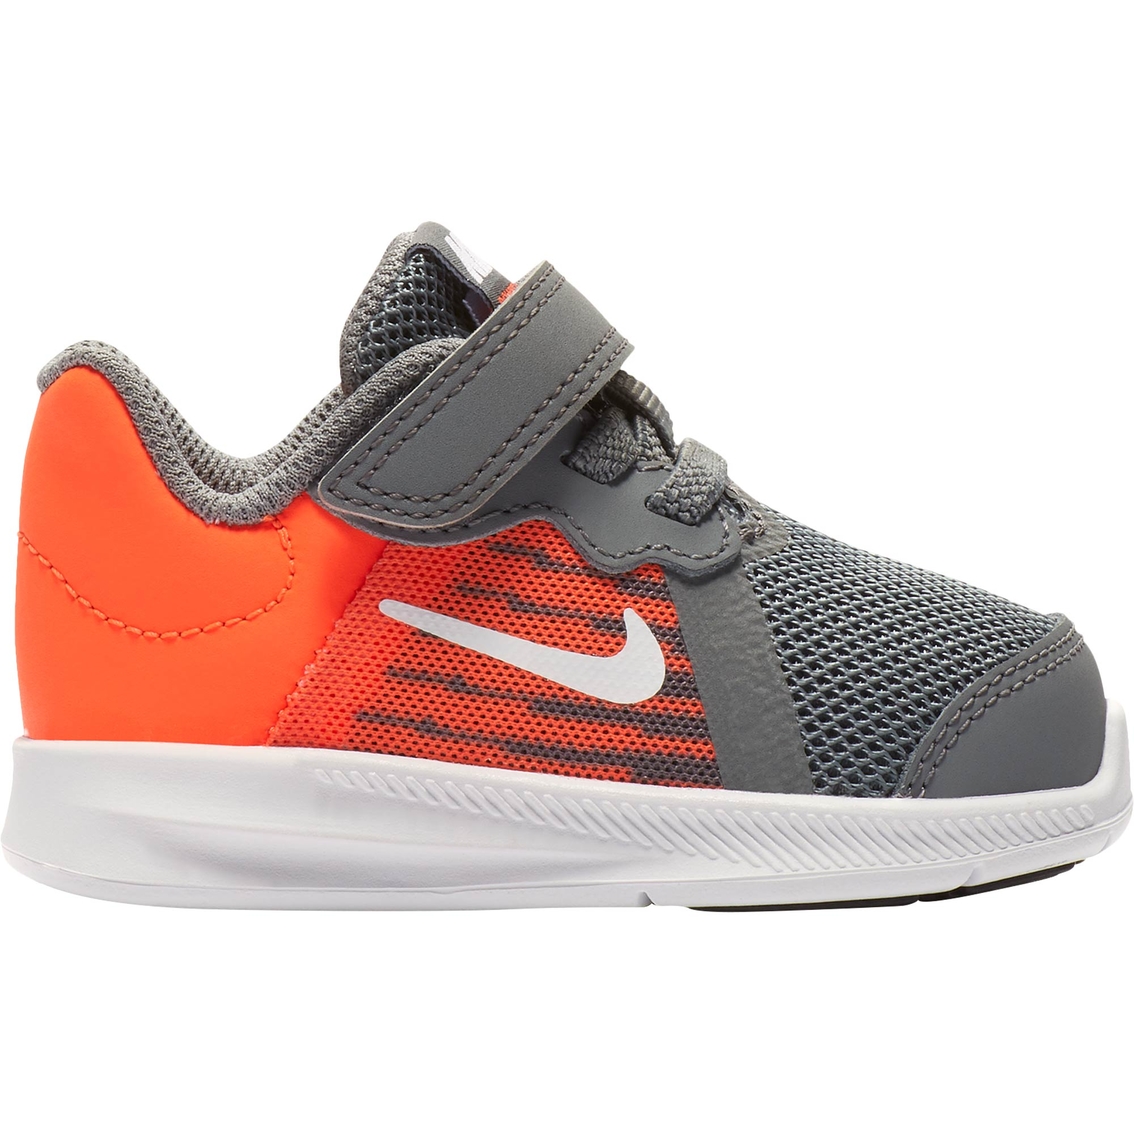 Nike Toddler Boys Downshifter 8 Running Shoes | Children's Athletic ...